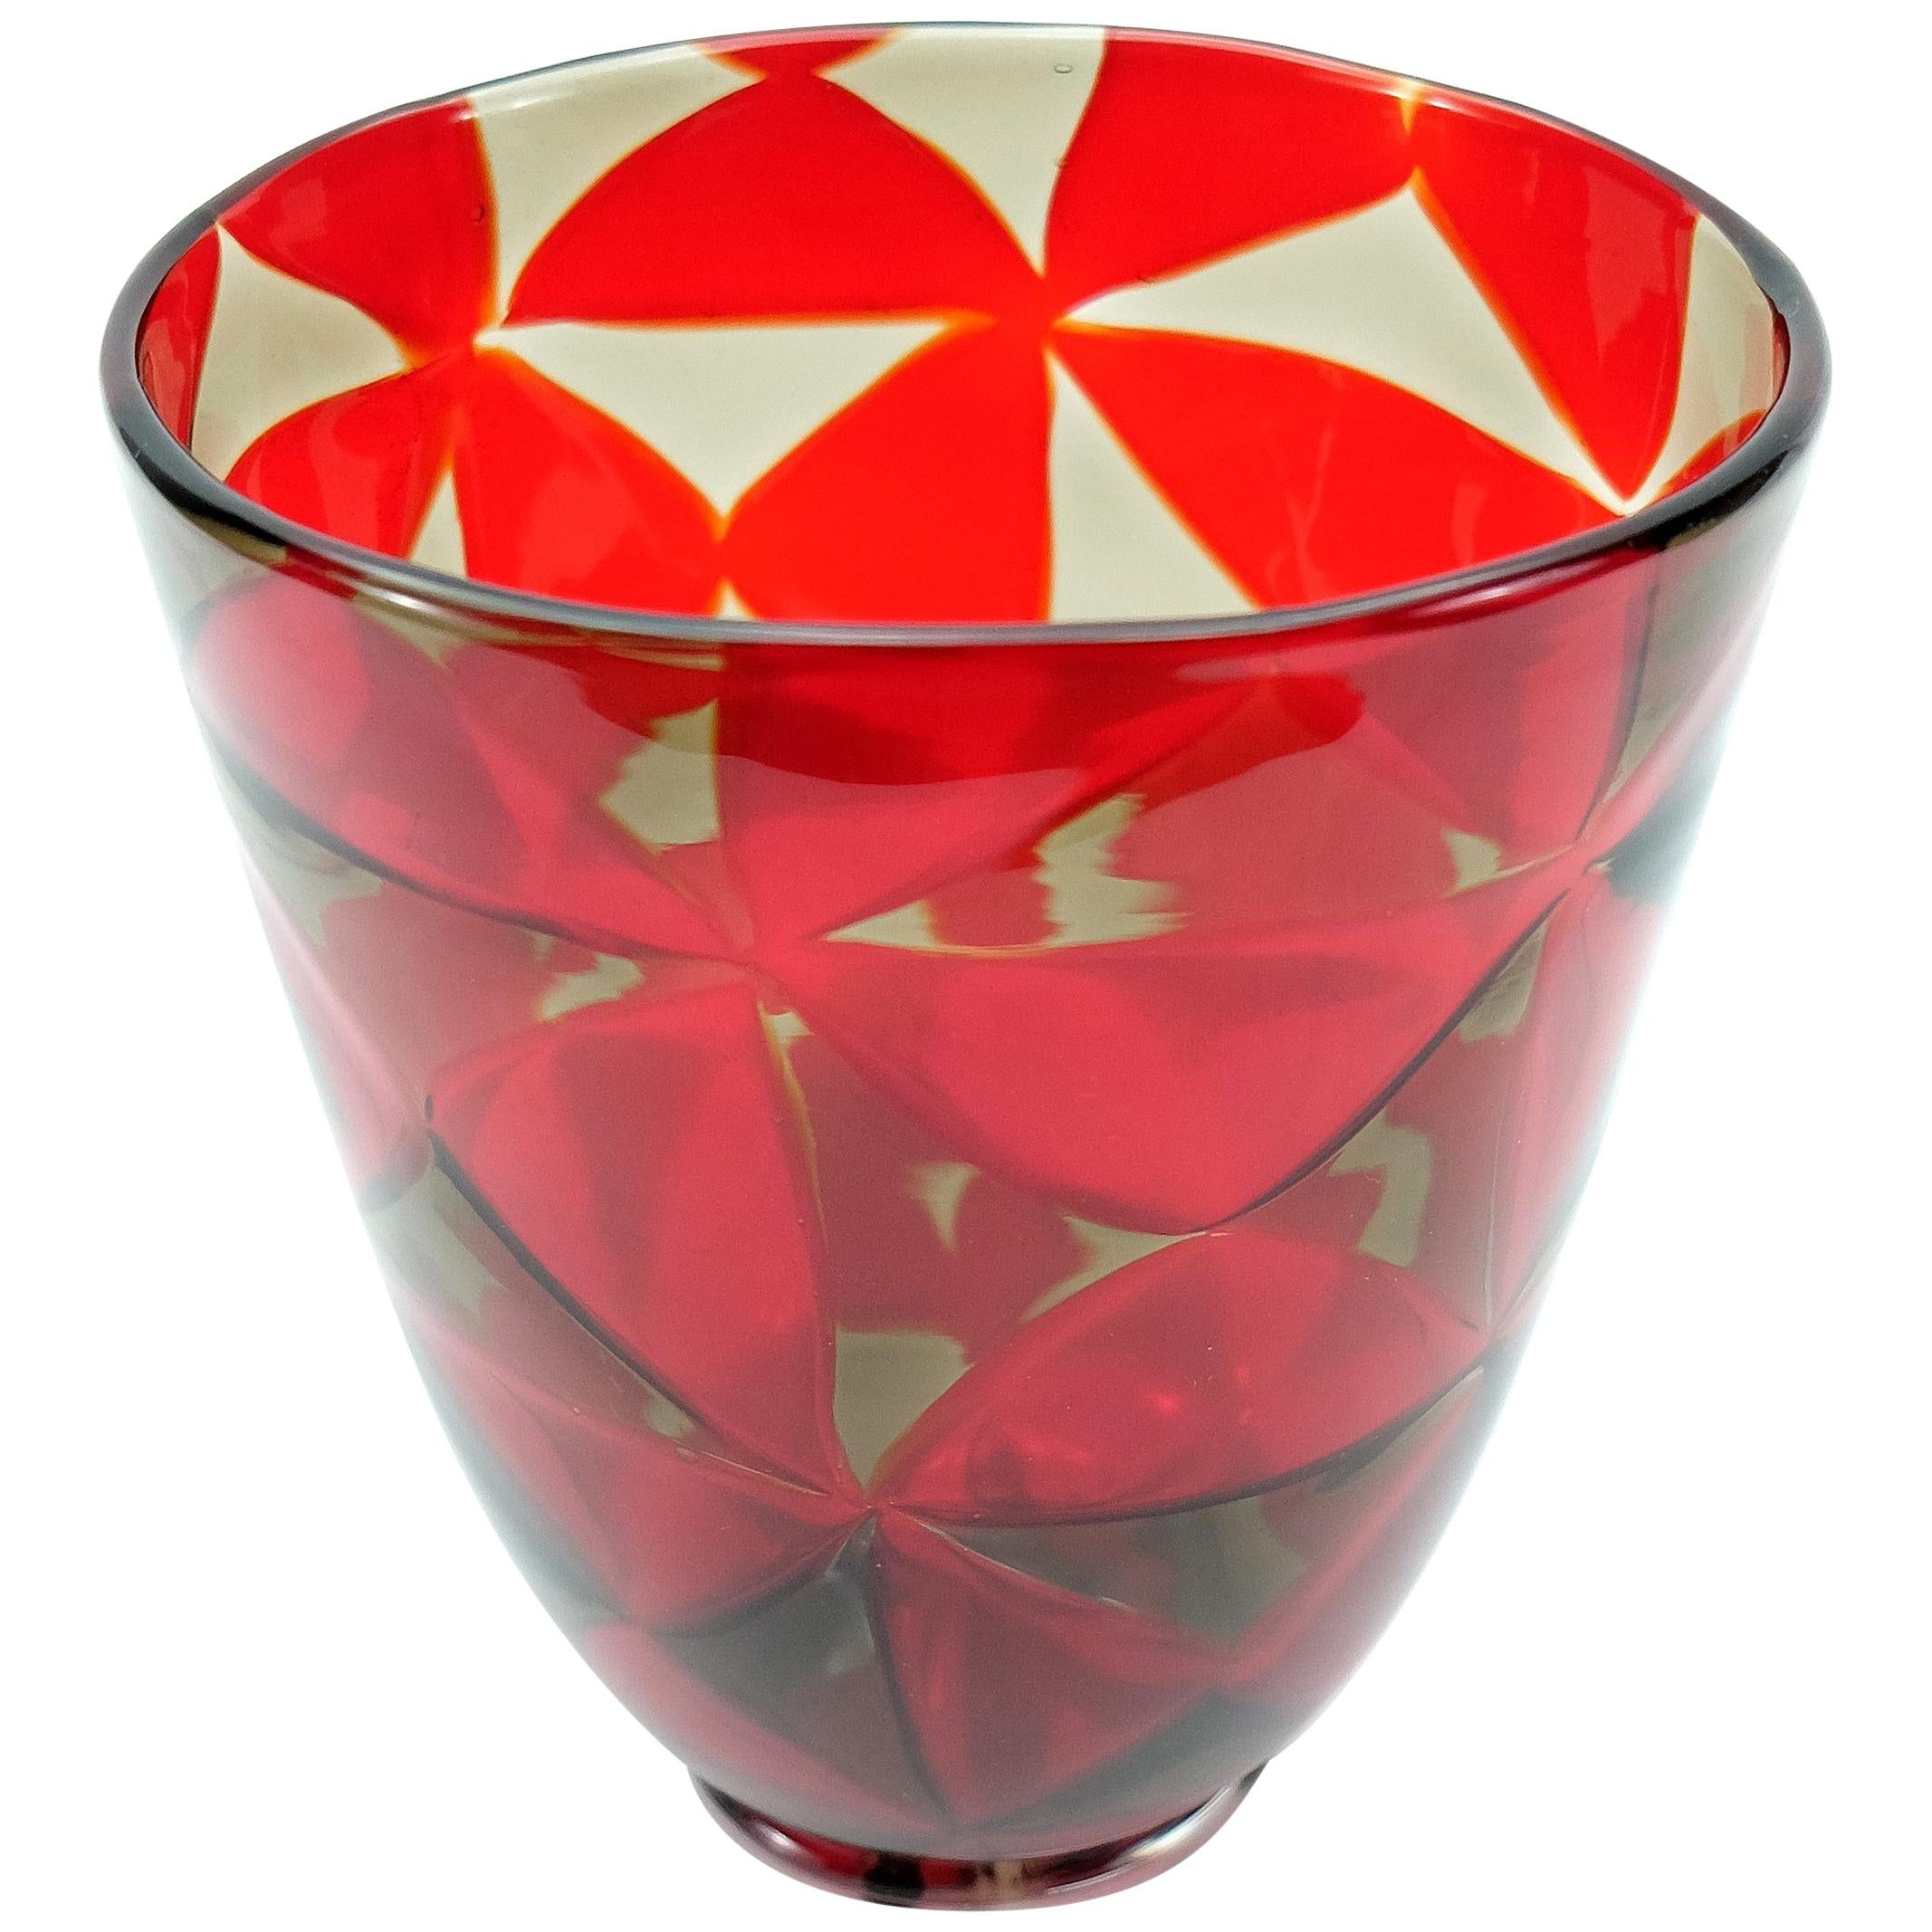 Barovier & Toso Red Mosaic Triangle Murano Glass Vase

Offered for sale is a magnificent handblown red mosaic triangle Murano Glass vase by Barovier & Toso. The handblown vase is signed on the base and retains the original maker's label.

 